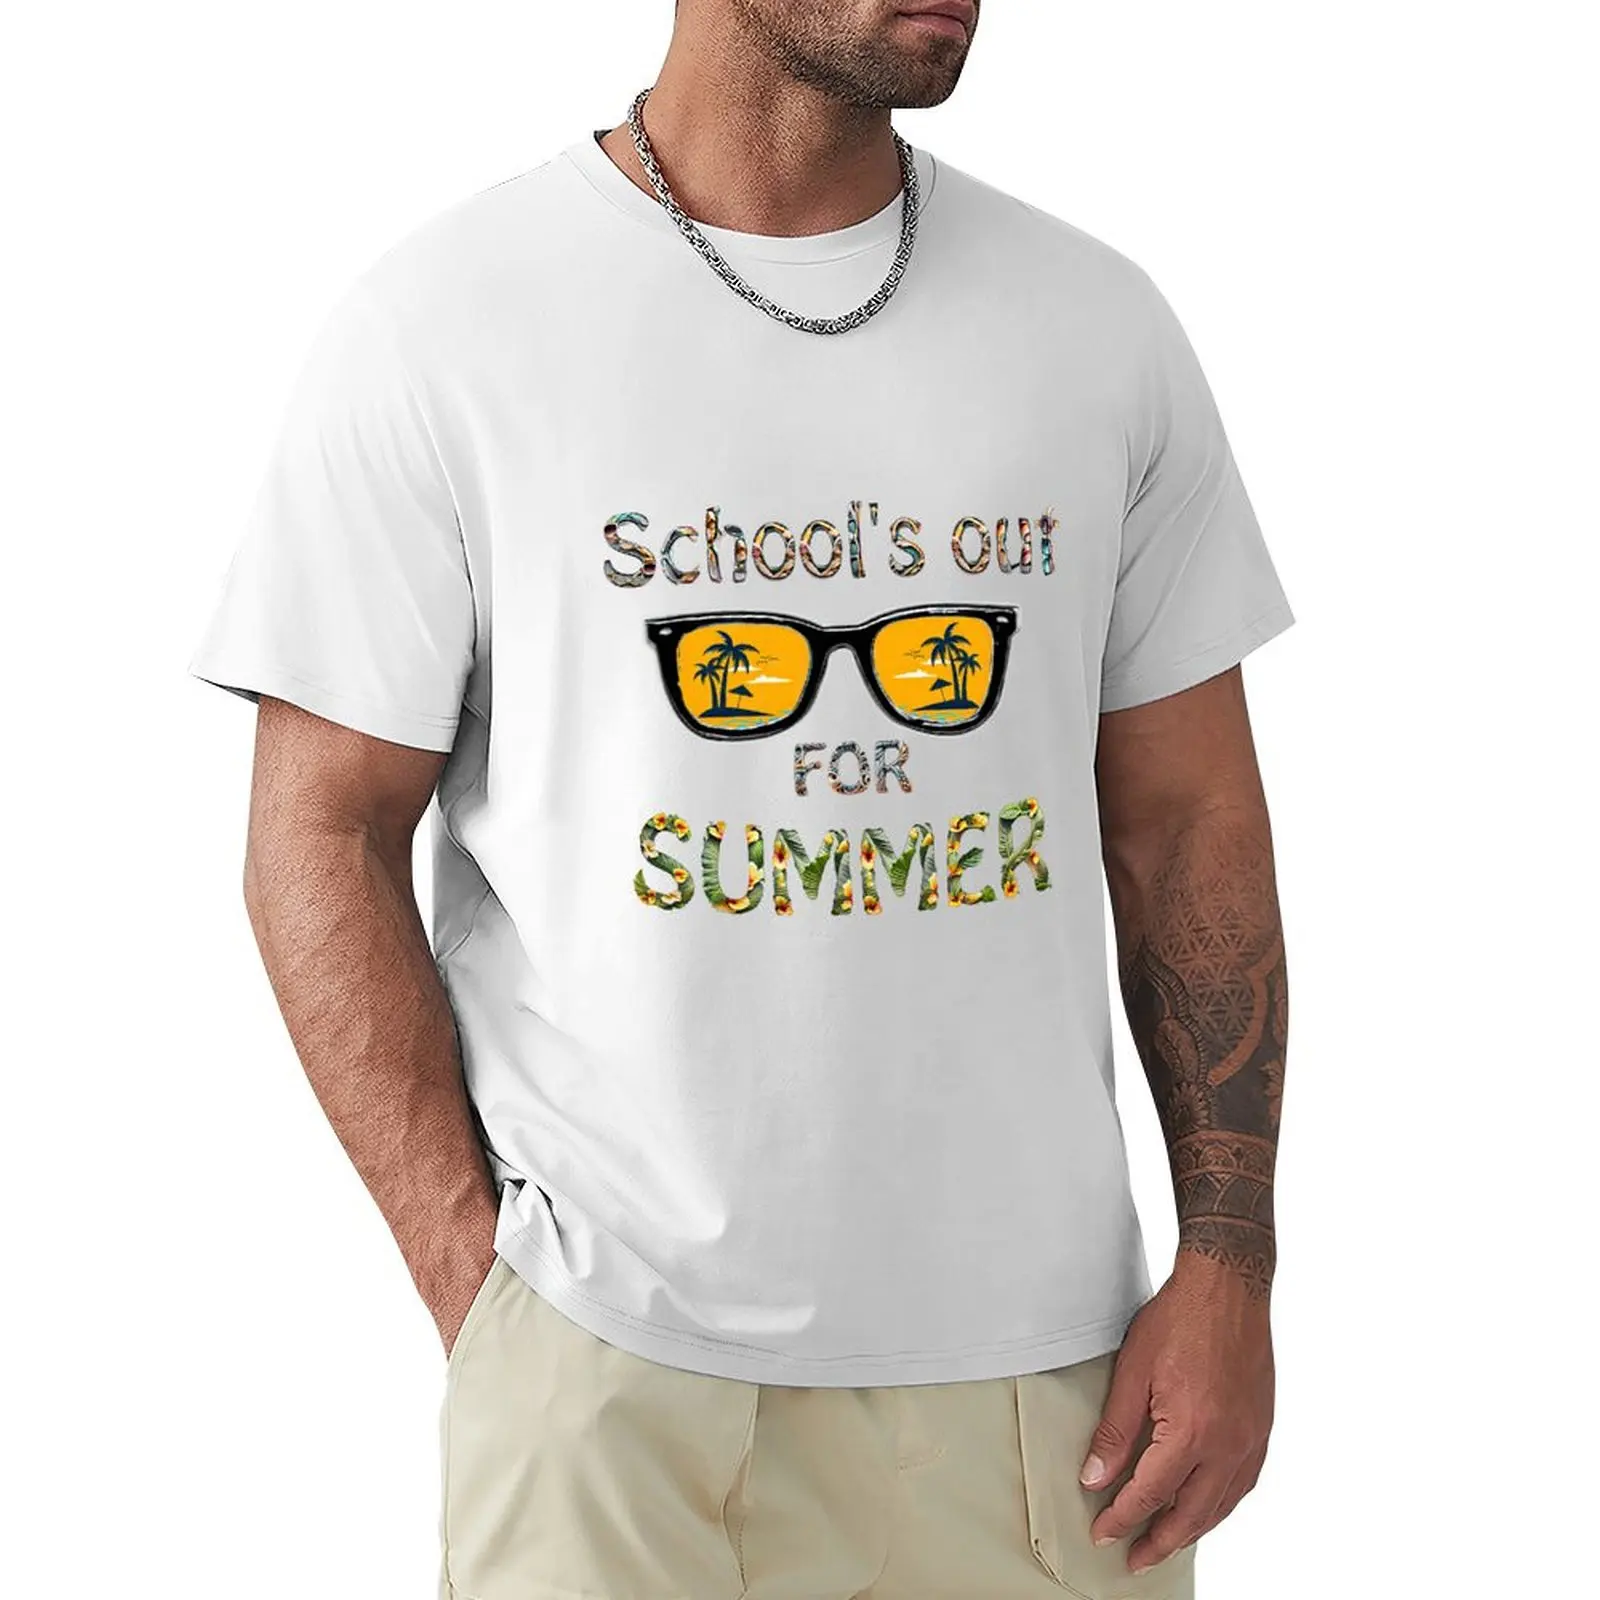 

school's out for summer t-shirt T-Shirt oversizeds shirts graphic tees hippie clothes sweat shirts, men